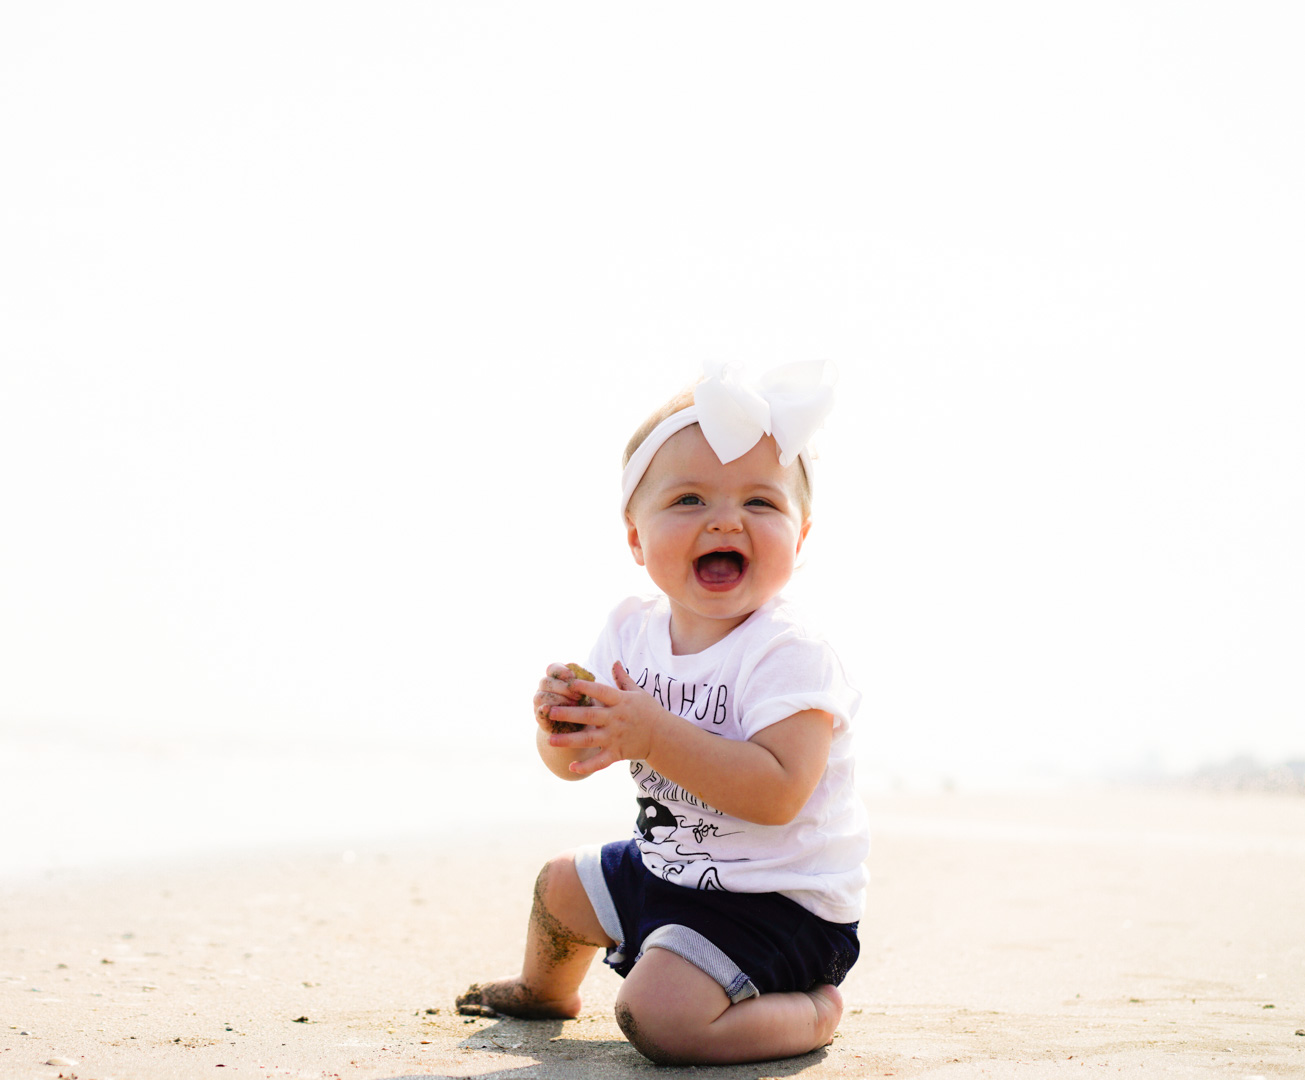 Katelyn Jones A Touch of Pink Blog Munchkin Campaign Orca Awareness Cute Baby Girl Beach